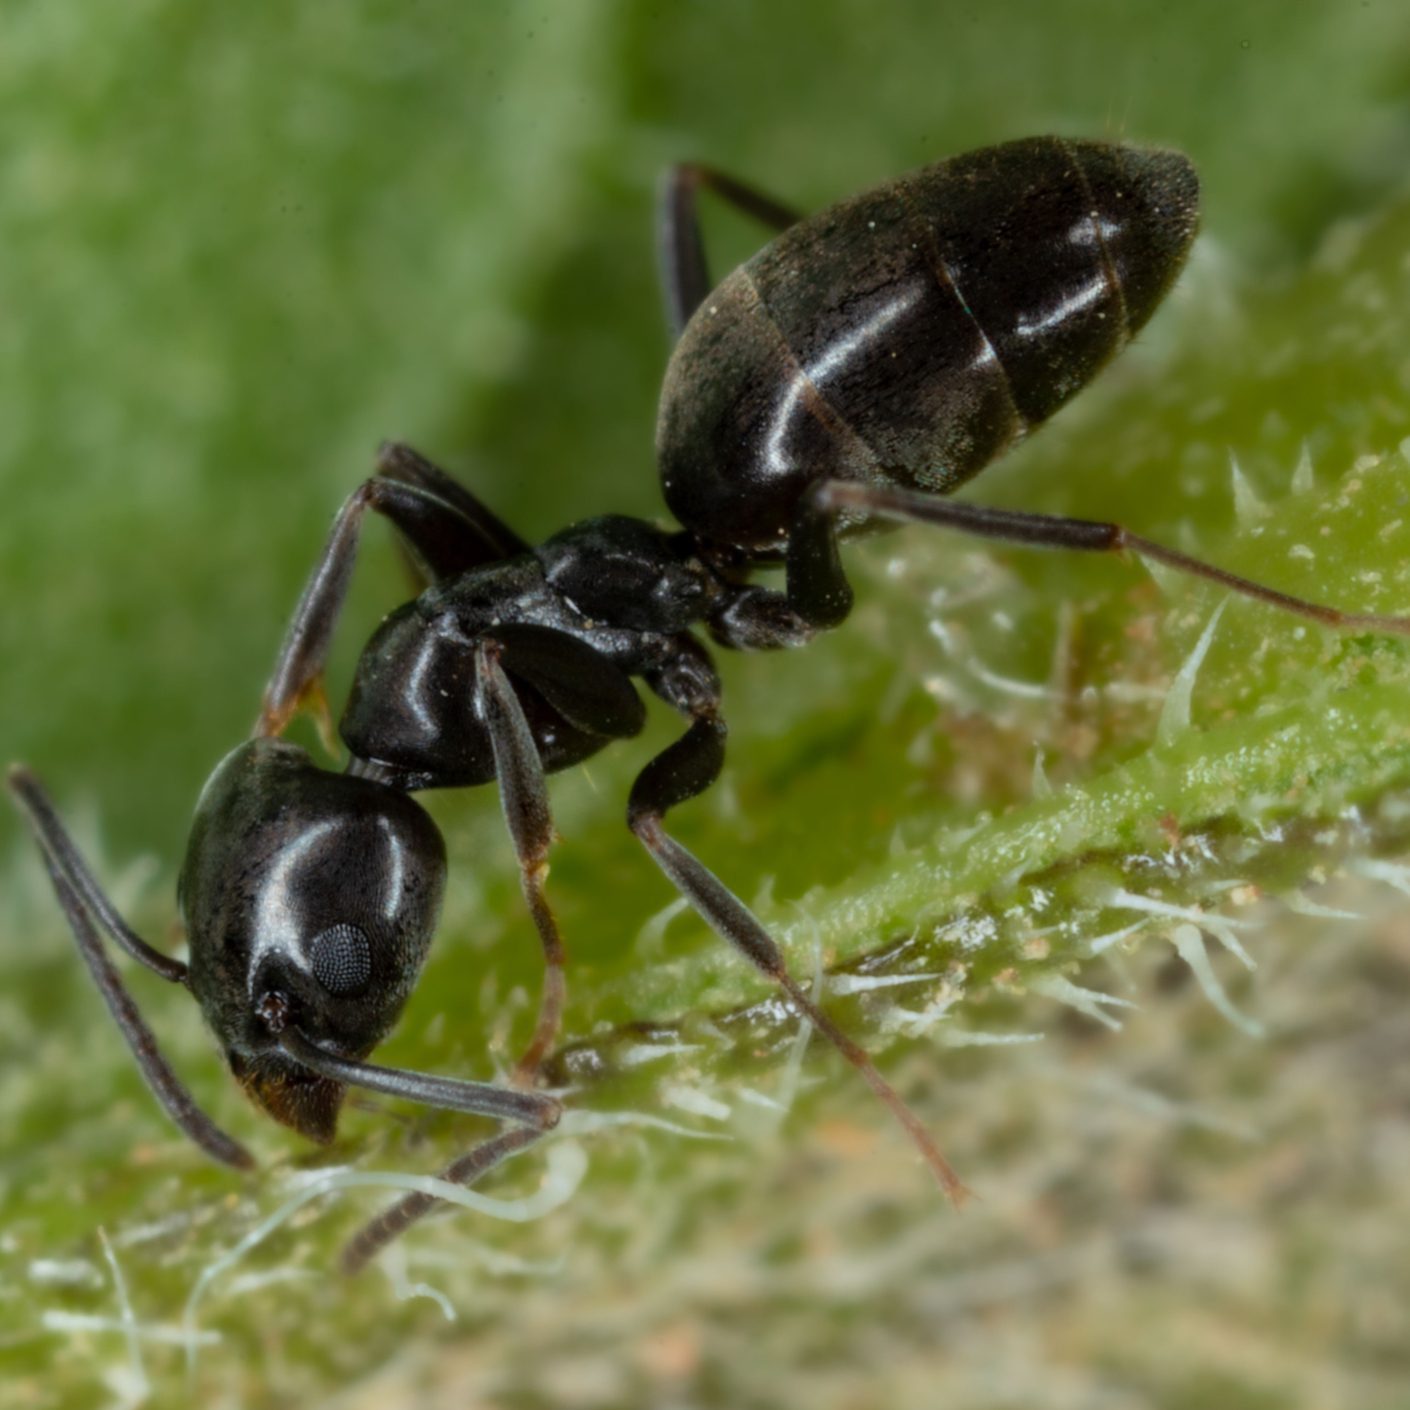 Closeup of an Tapinoma sessile ant walking on green grass